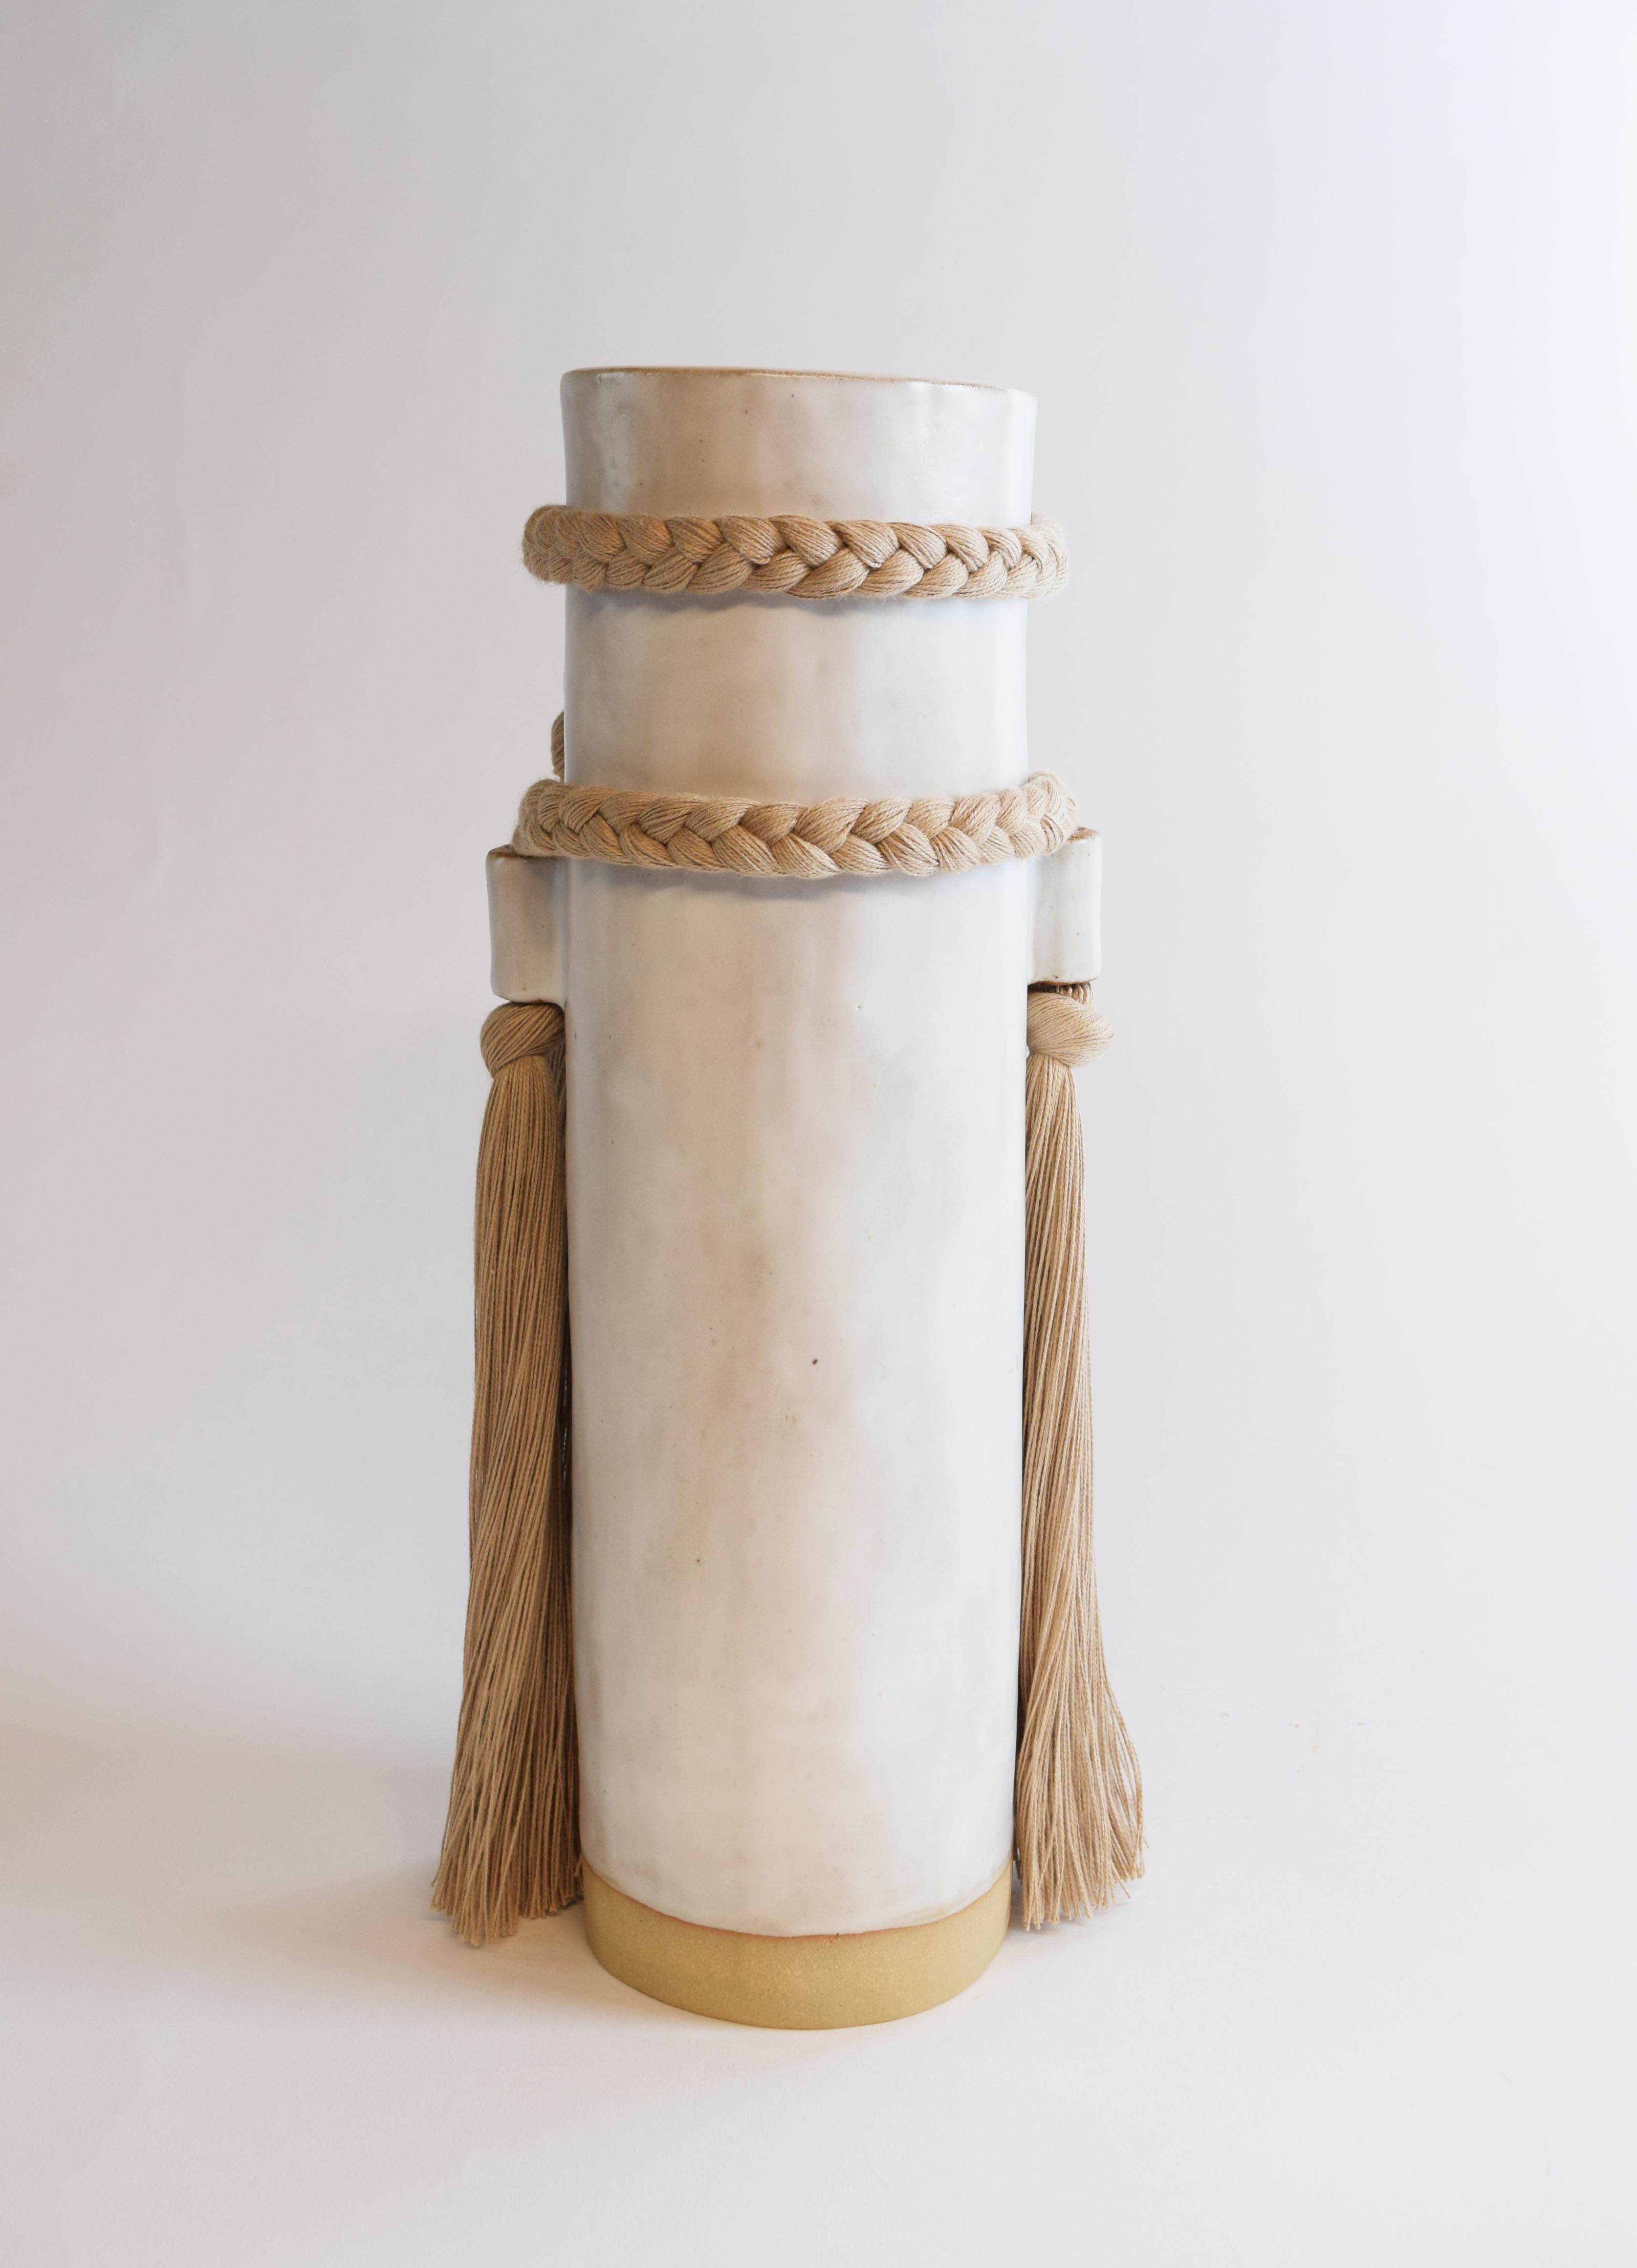 American Handmade Ceramic Vase #735 in White with Tan Cotton Braided & Fringe Details For Sale